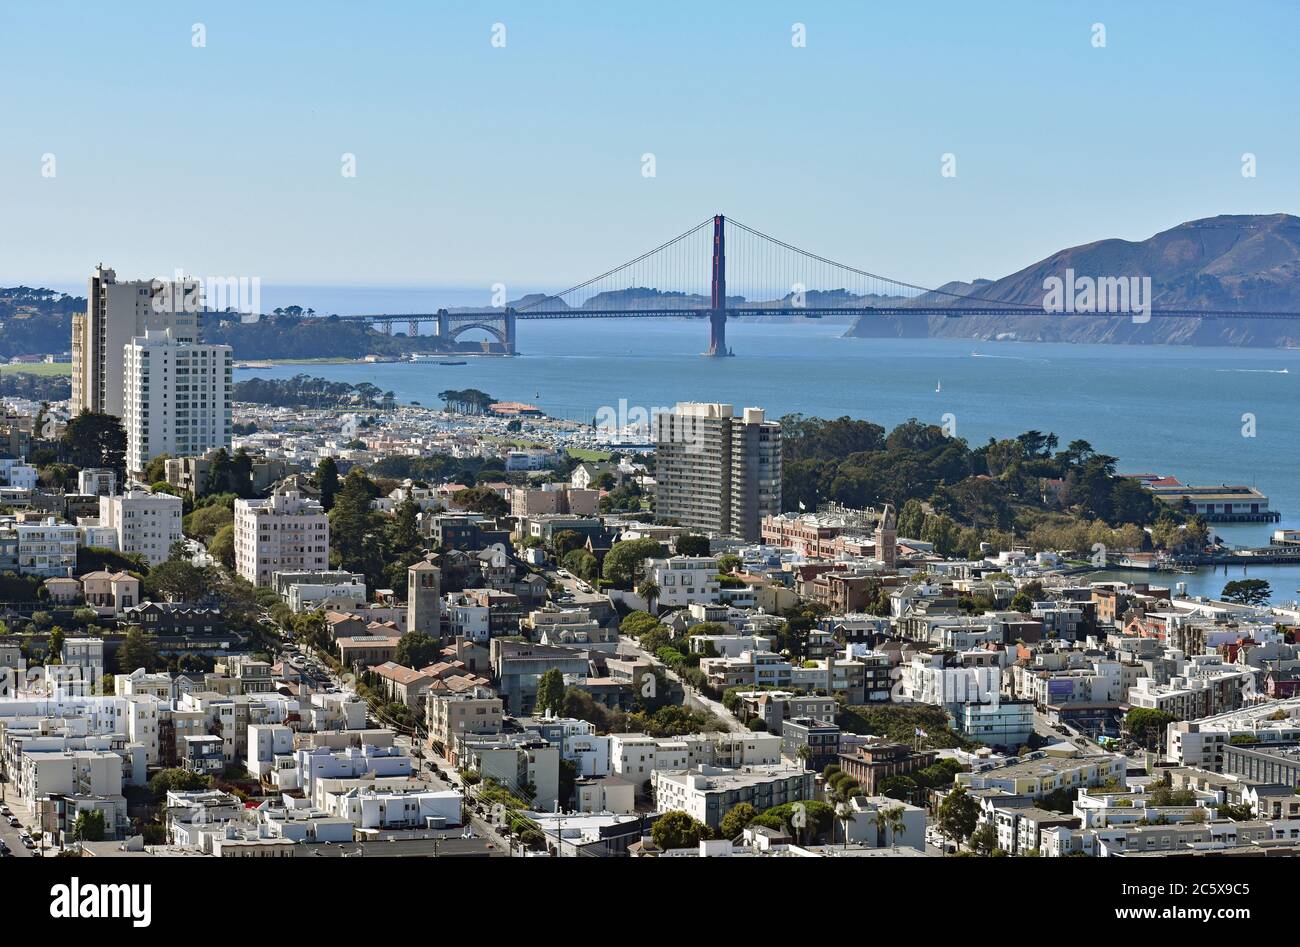 The Golden Gate Bridge & Marin Headlands from the top of the Coit Tower on Telegraph Hill.  Streets and hills of San Fancisco in the foreground. Stock Photo